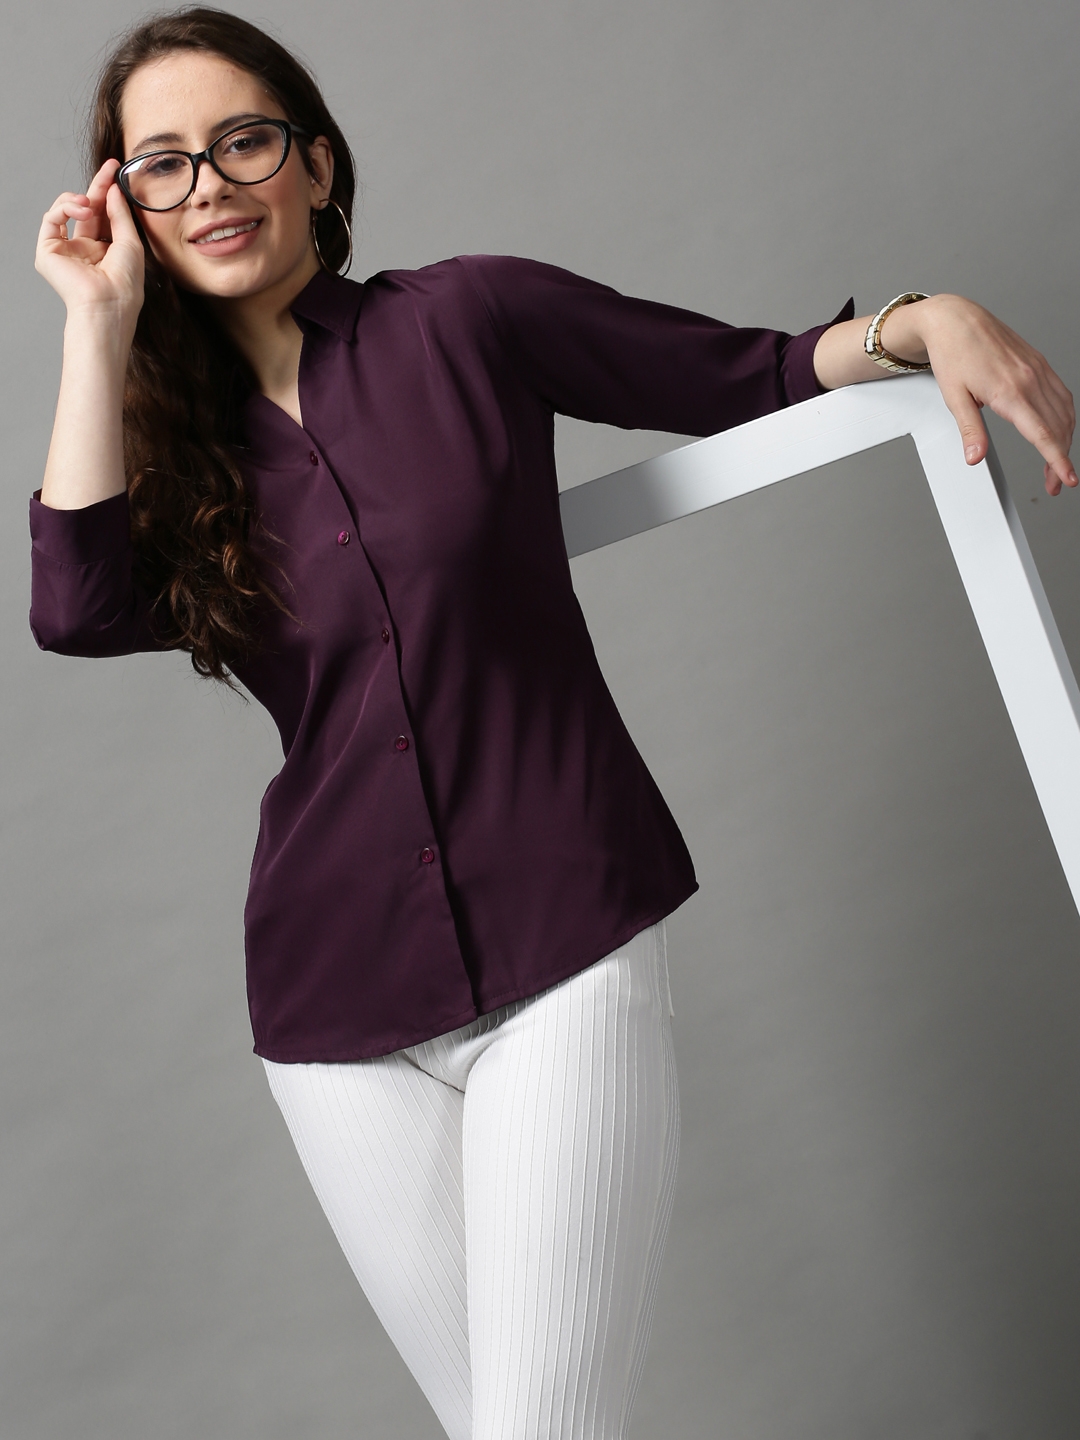 SHOWOFF Women's Spread Collar Solid Violet Polyester Shirt